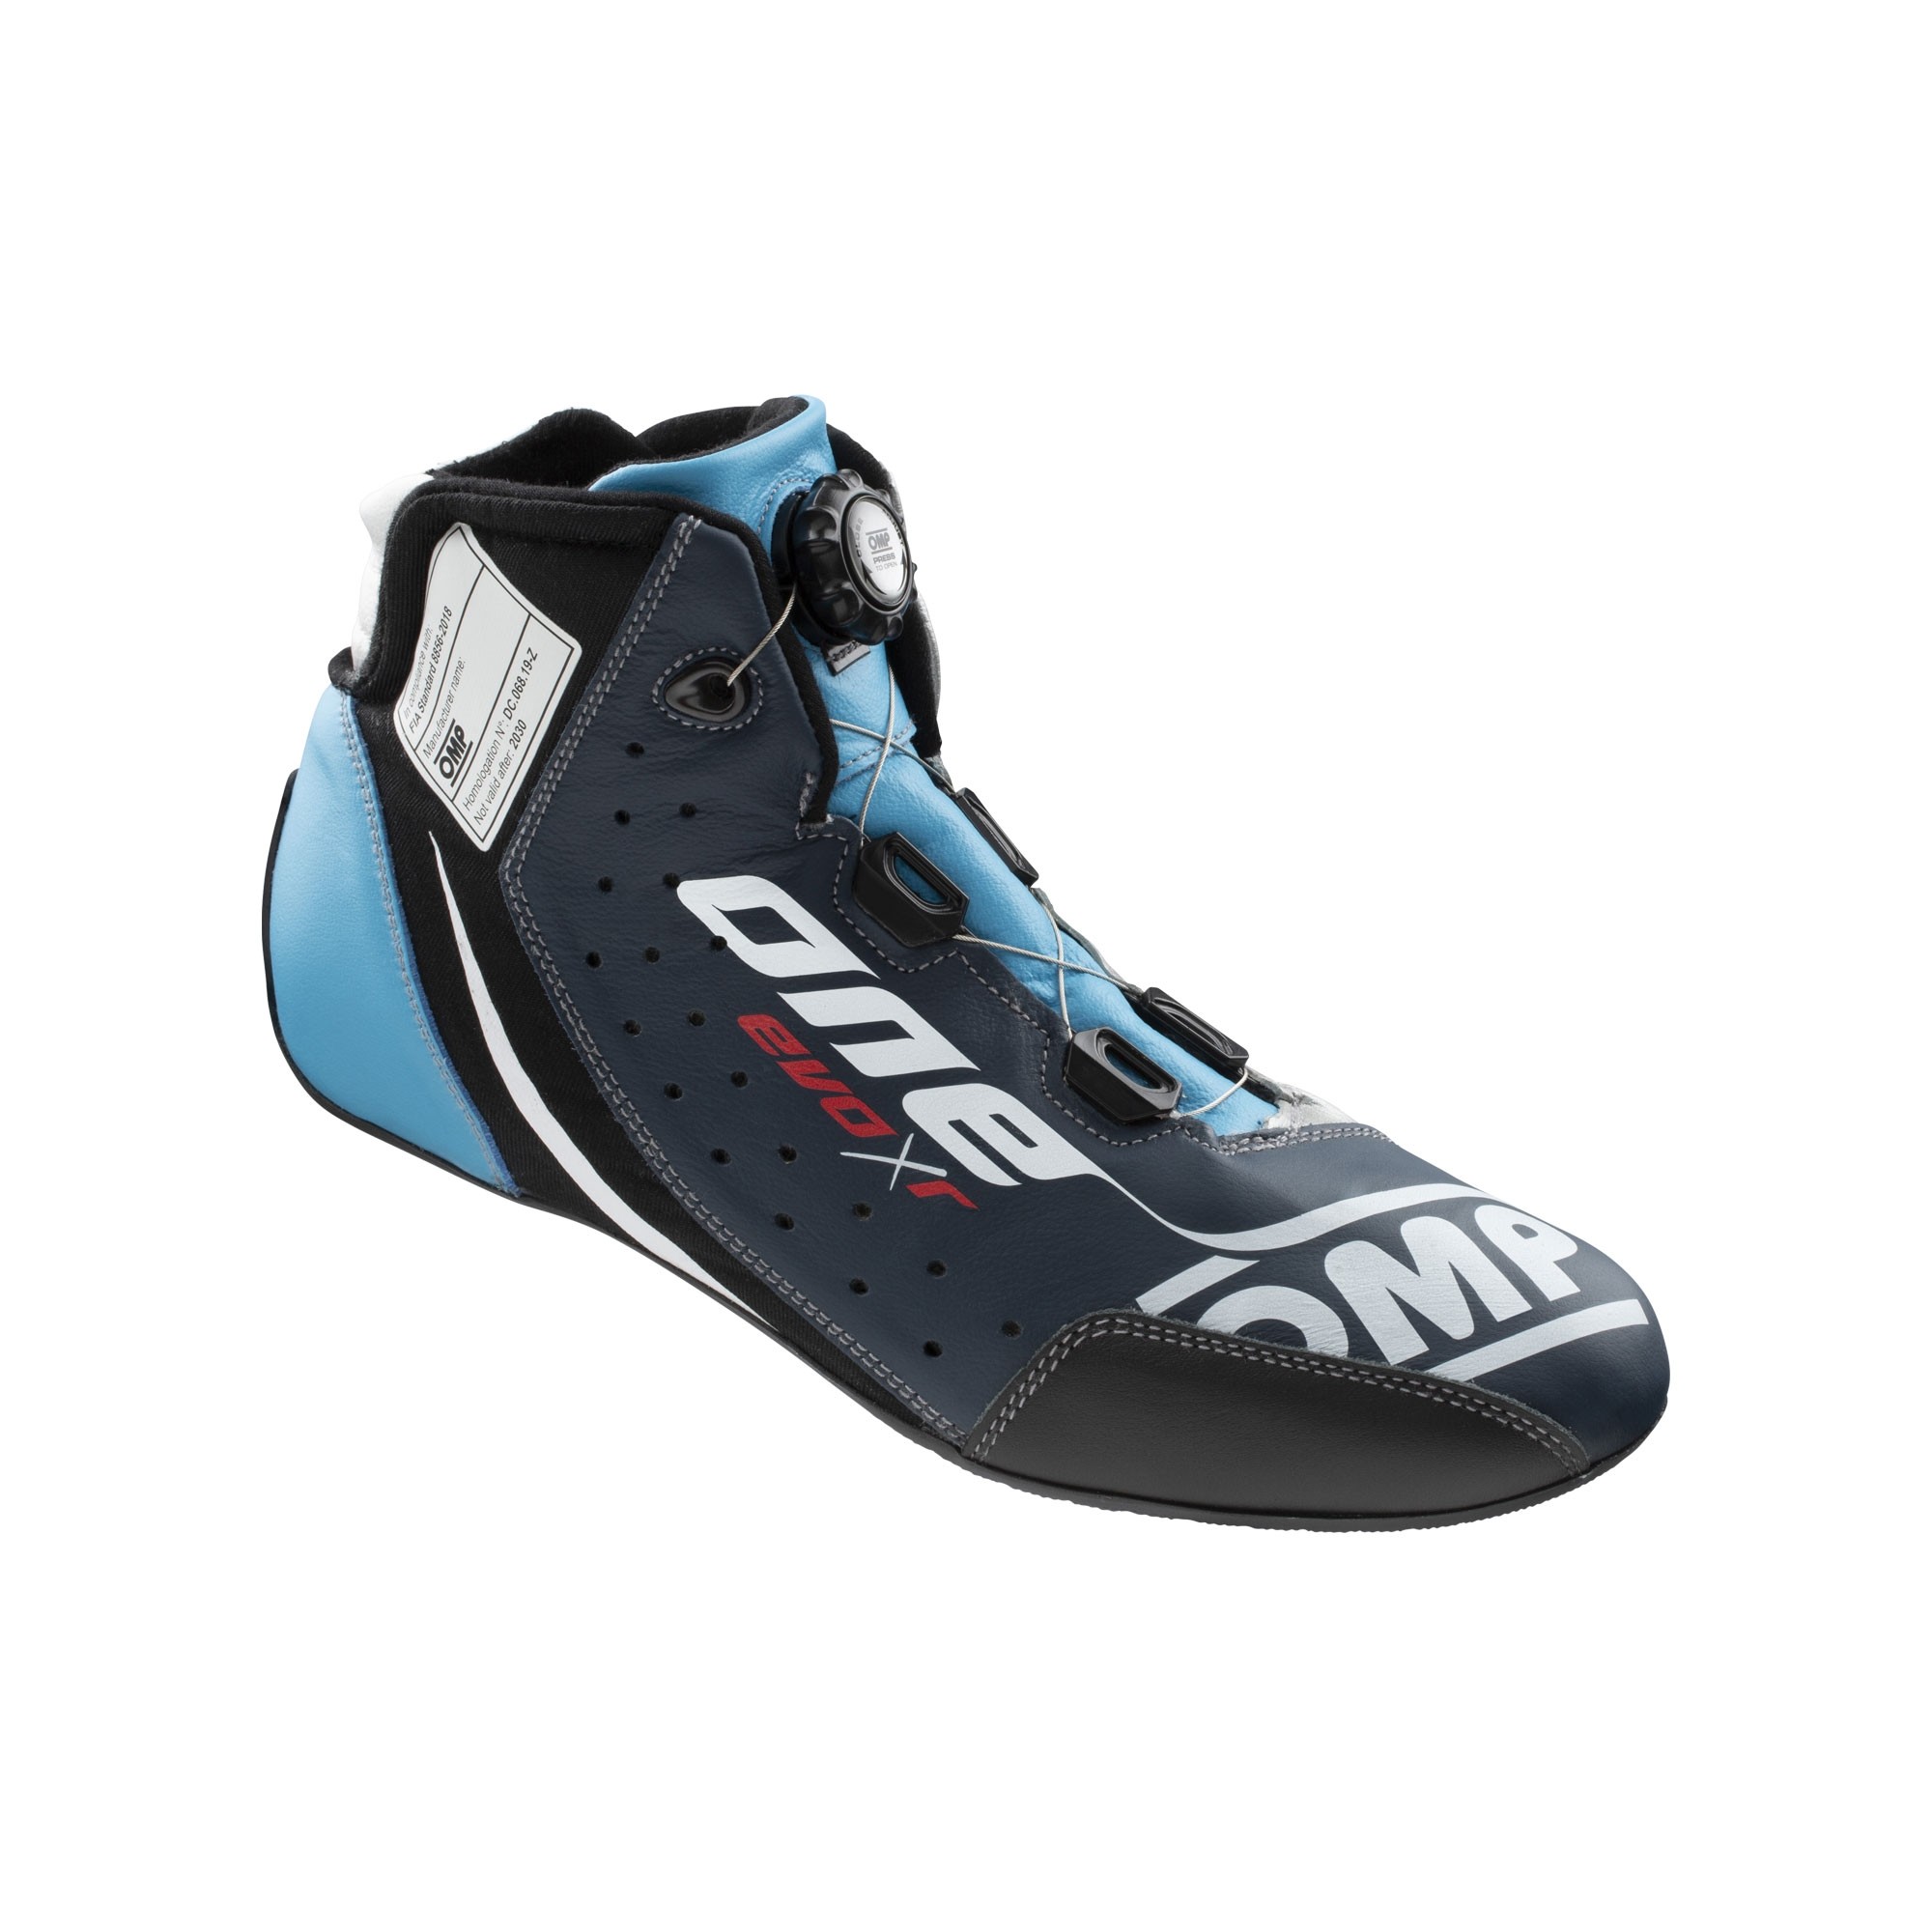 ONE EVO X R SHOES - Racing shoes